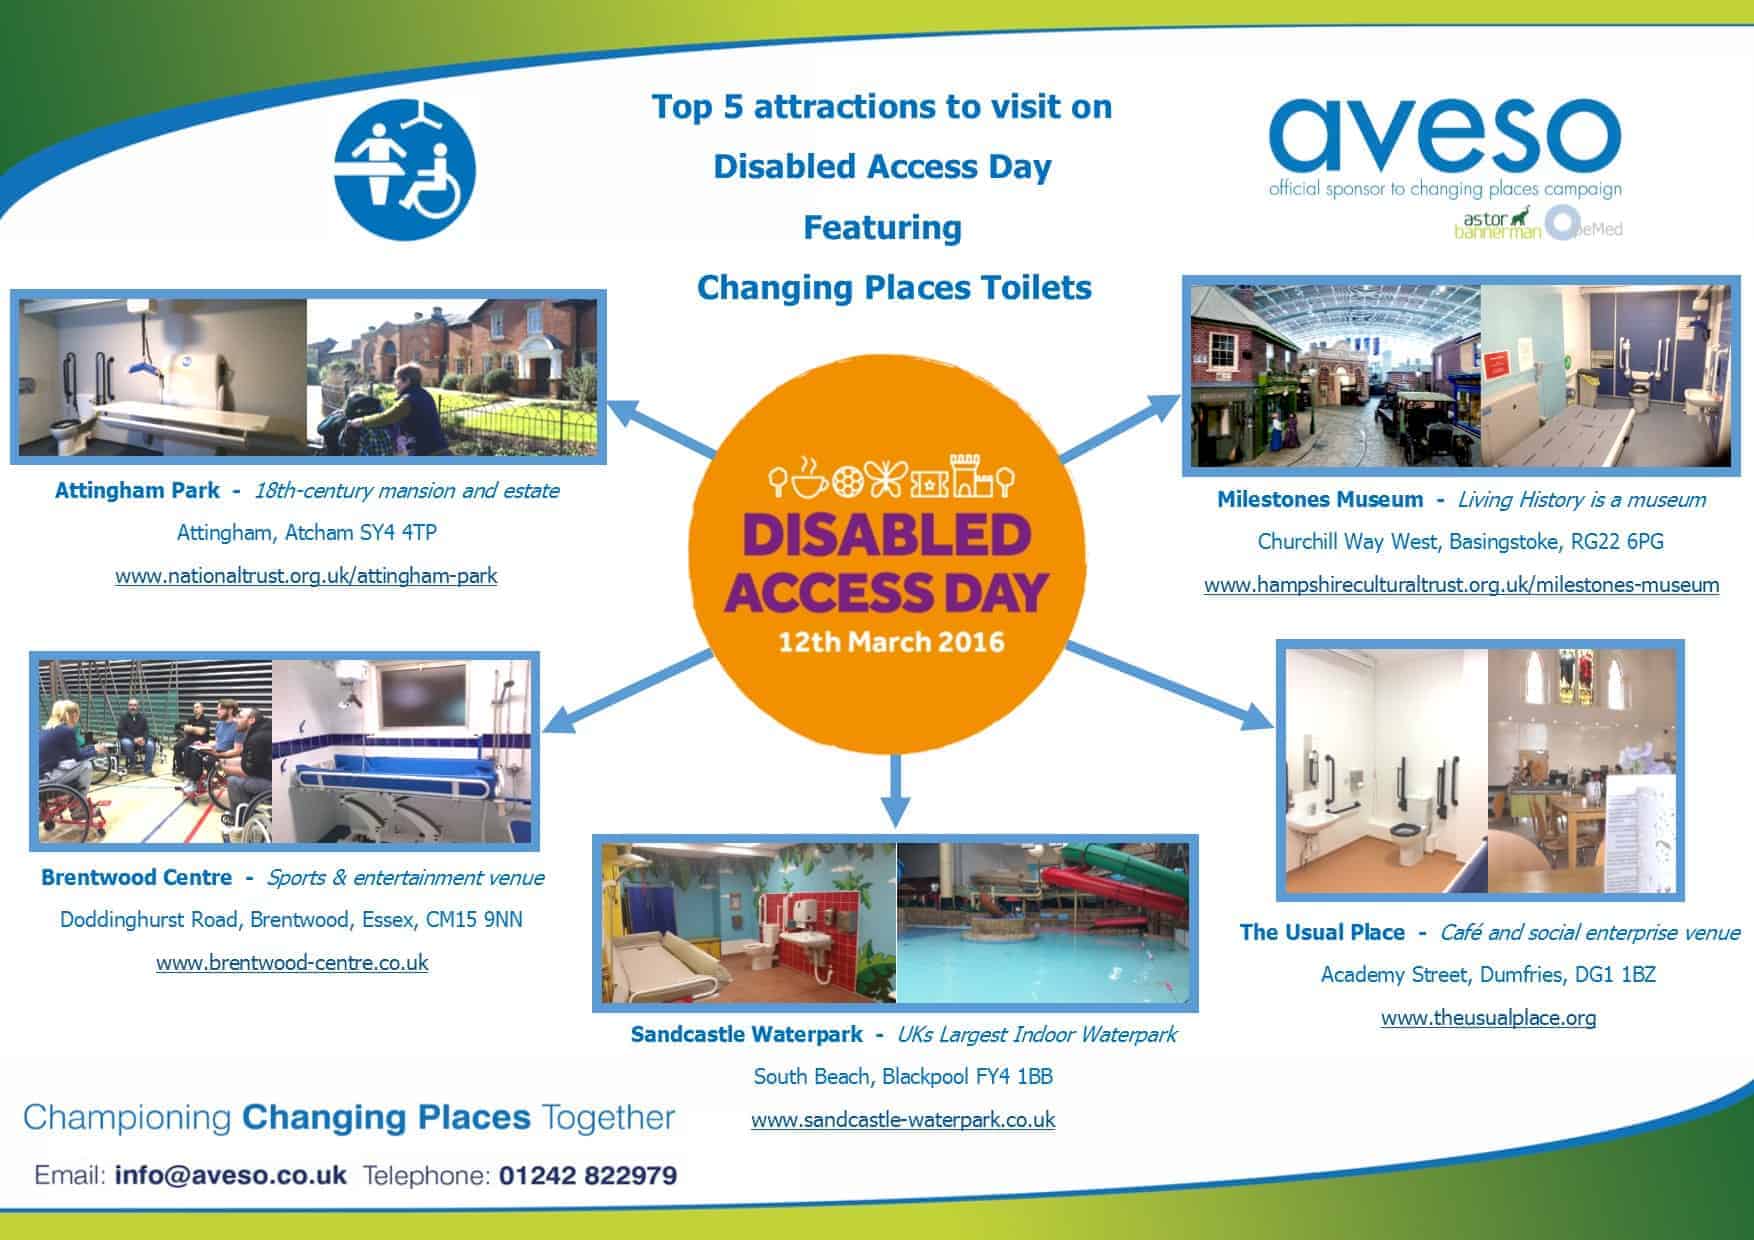 #AccessDay - Top 5 Places to visit